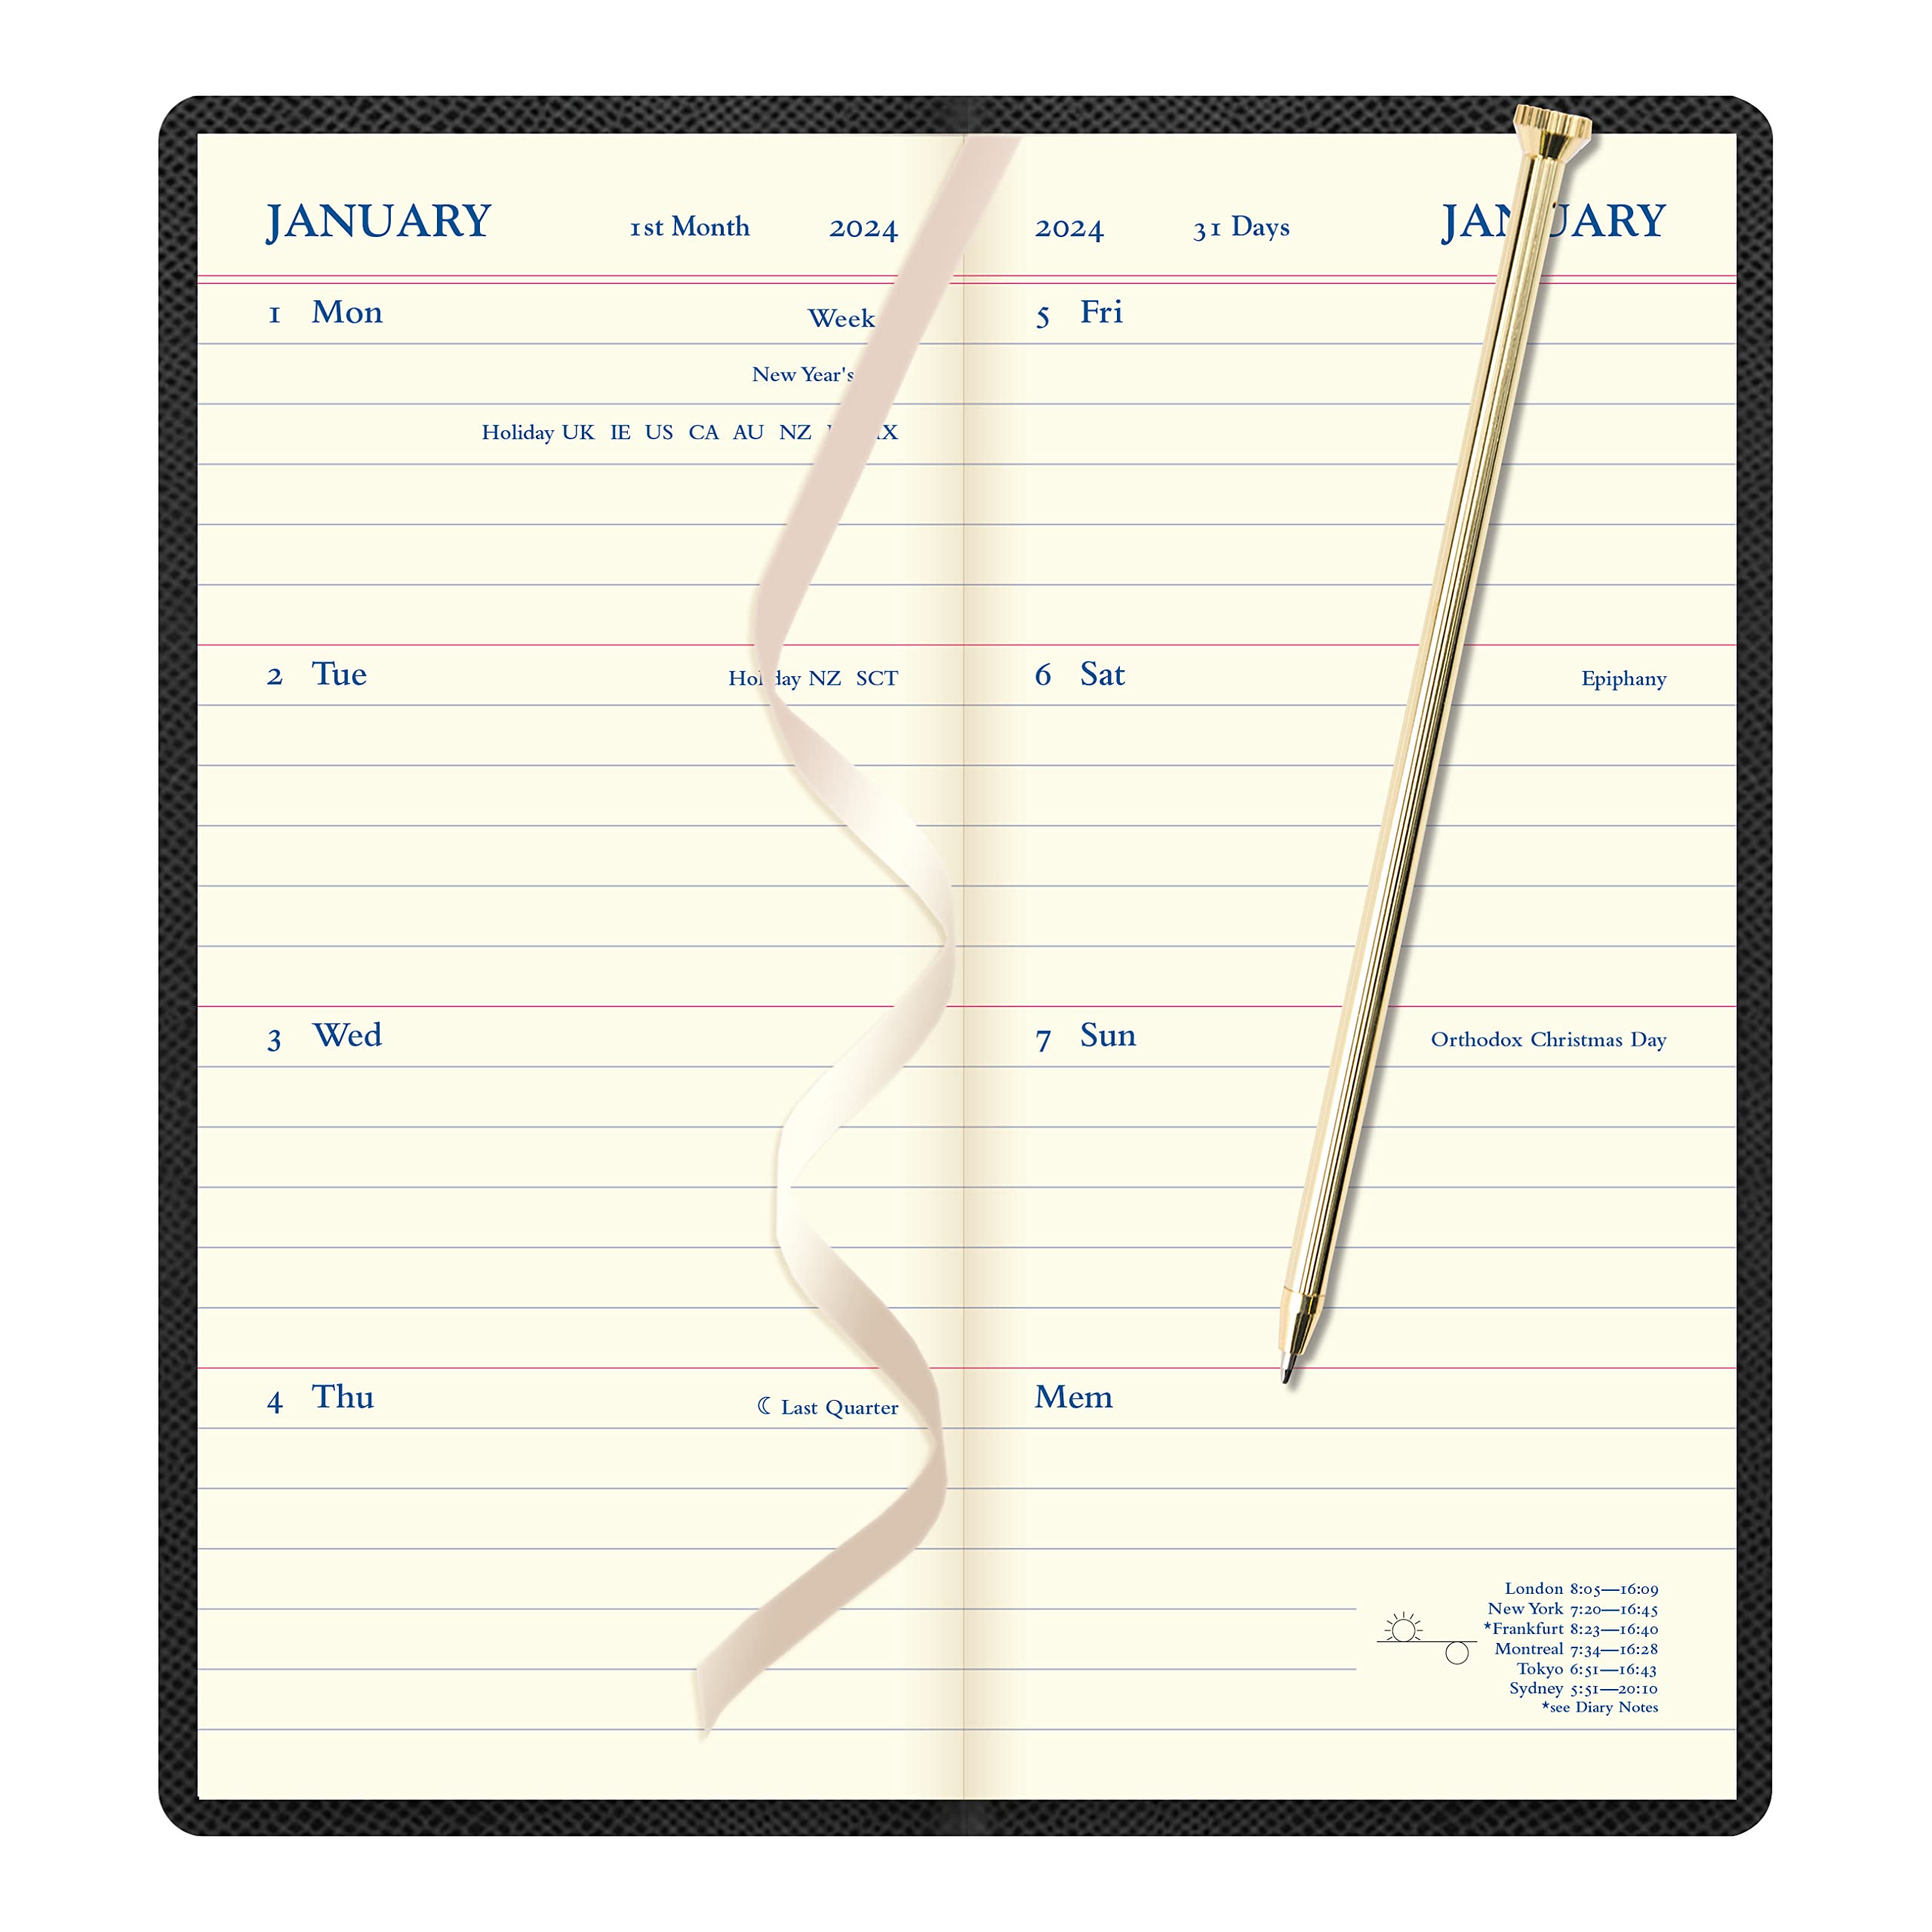 Letts of London Legacy Heritage Weekly/Monthly Planner, 12 Months, January to December, 2024, Slimline Pen, 6” x 3.375", Black (C081163-24)